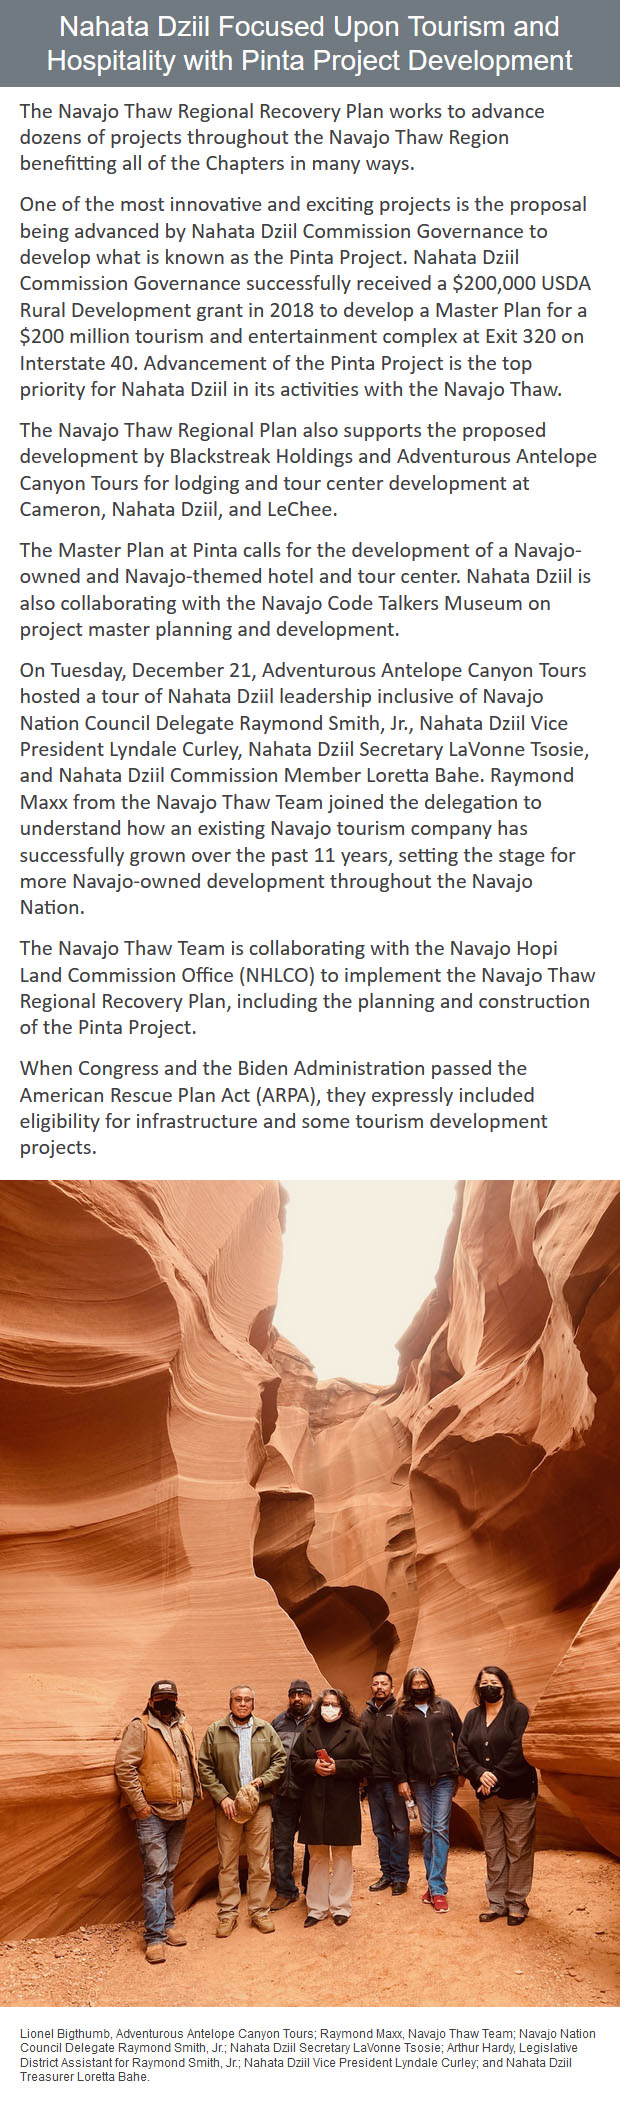 Nahata-Dziil-Focused-Upon-Tourism-and-Hospitality-with-Pinta-Project-Development